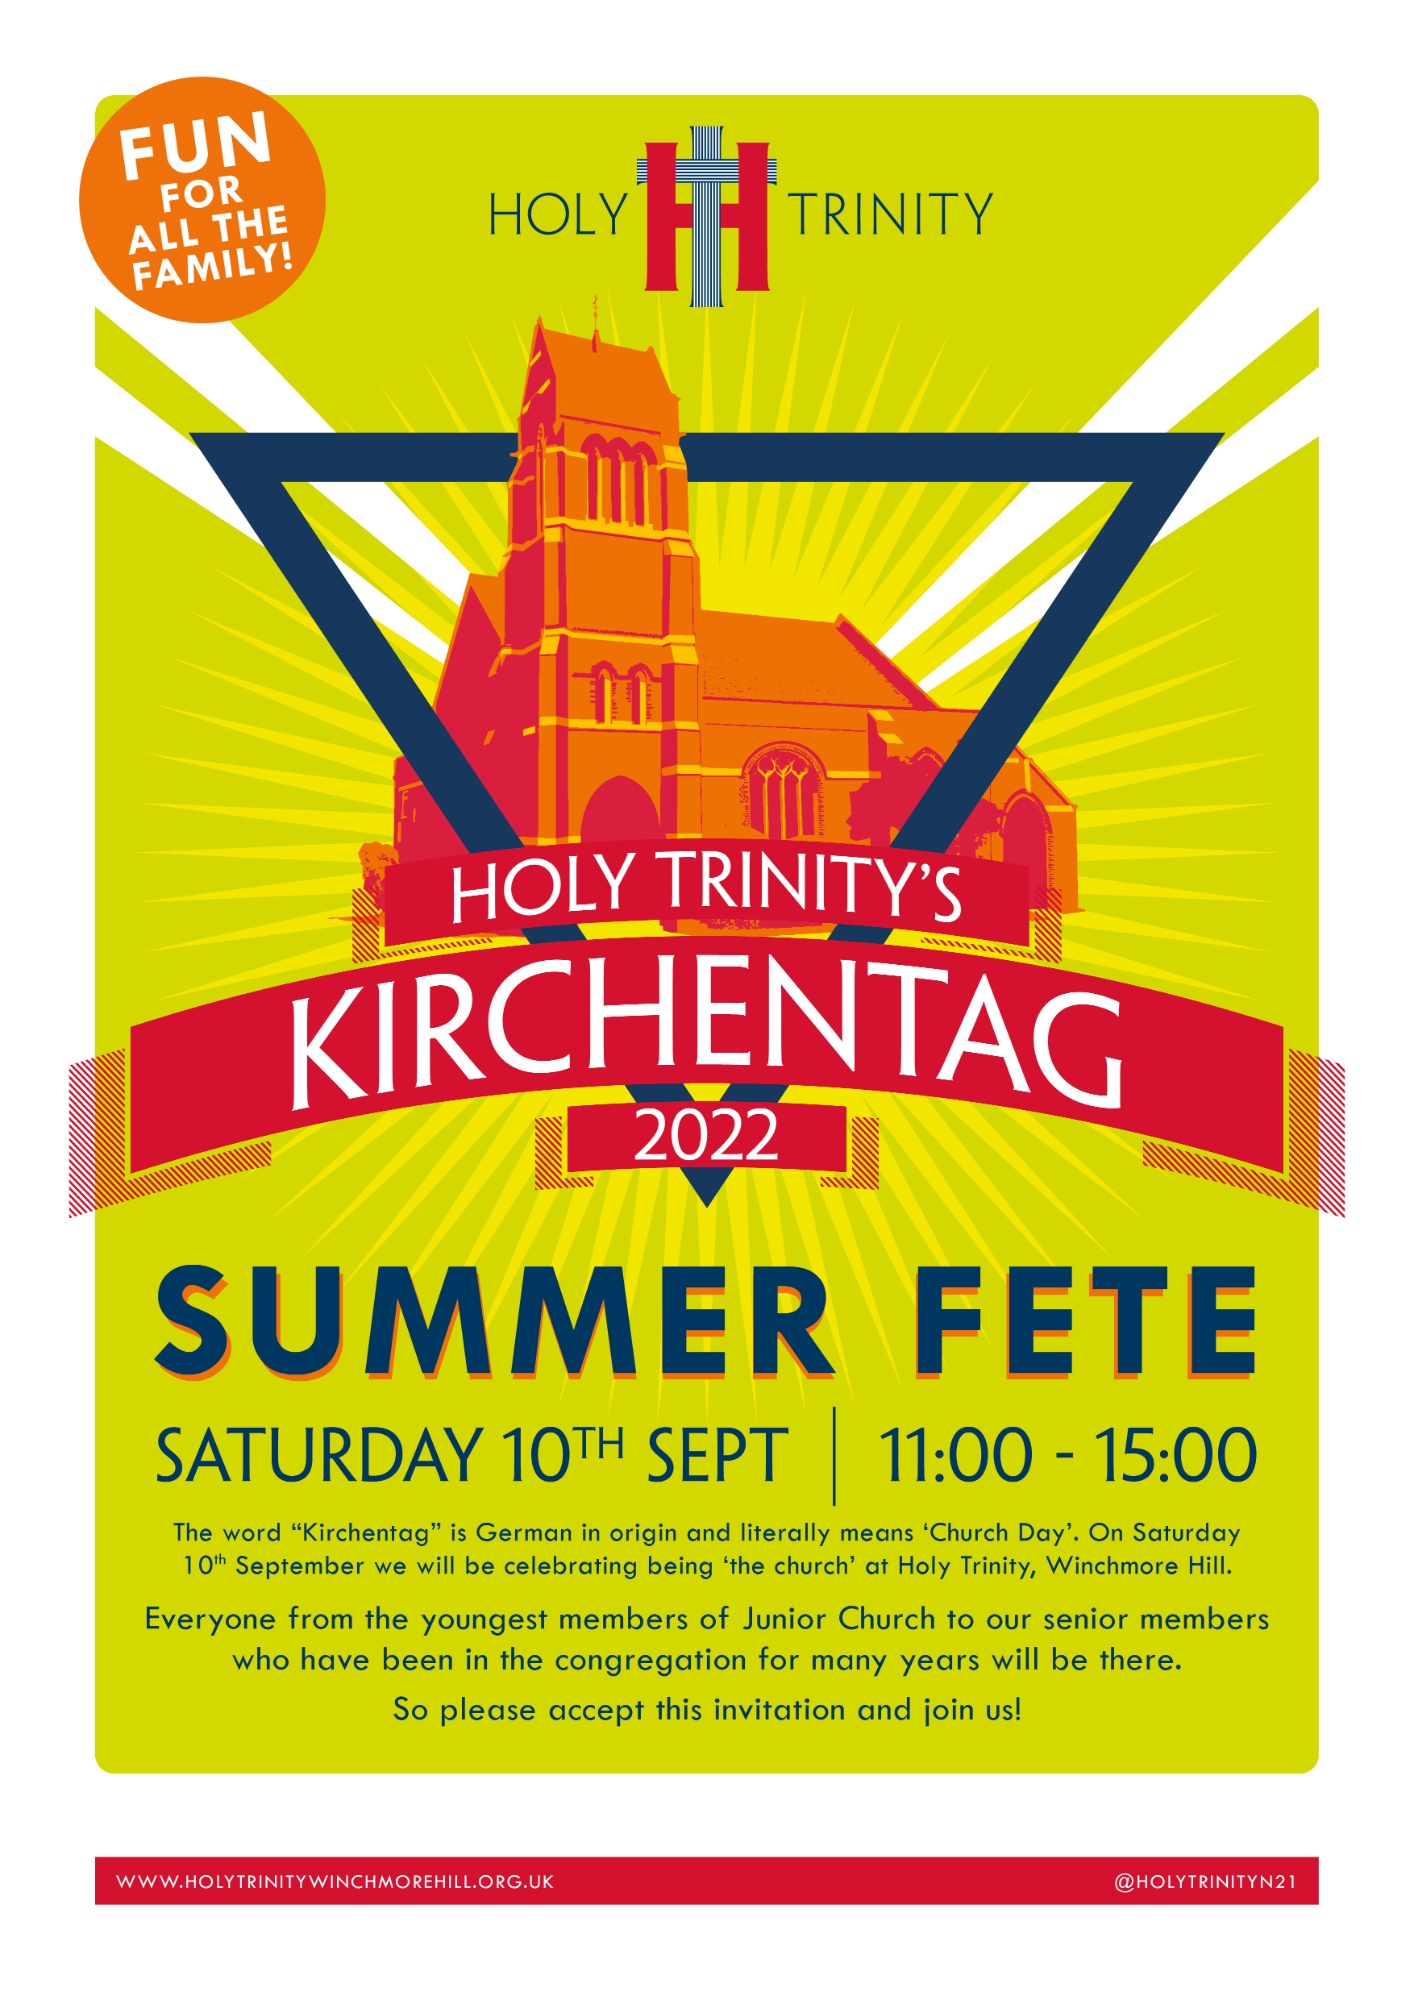 Poster for Holy Trinity''s Kirchentag - 10 September between 11:00-15:00